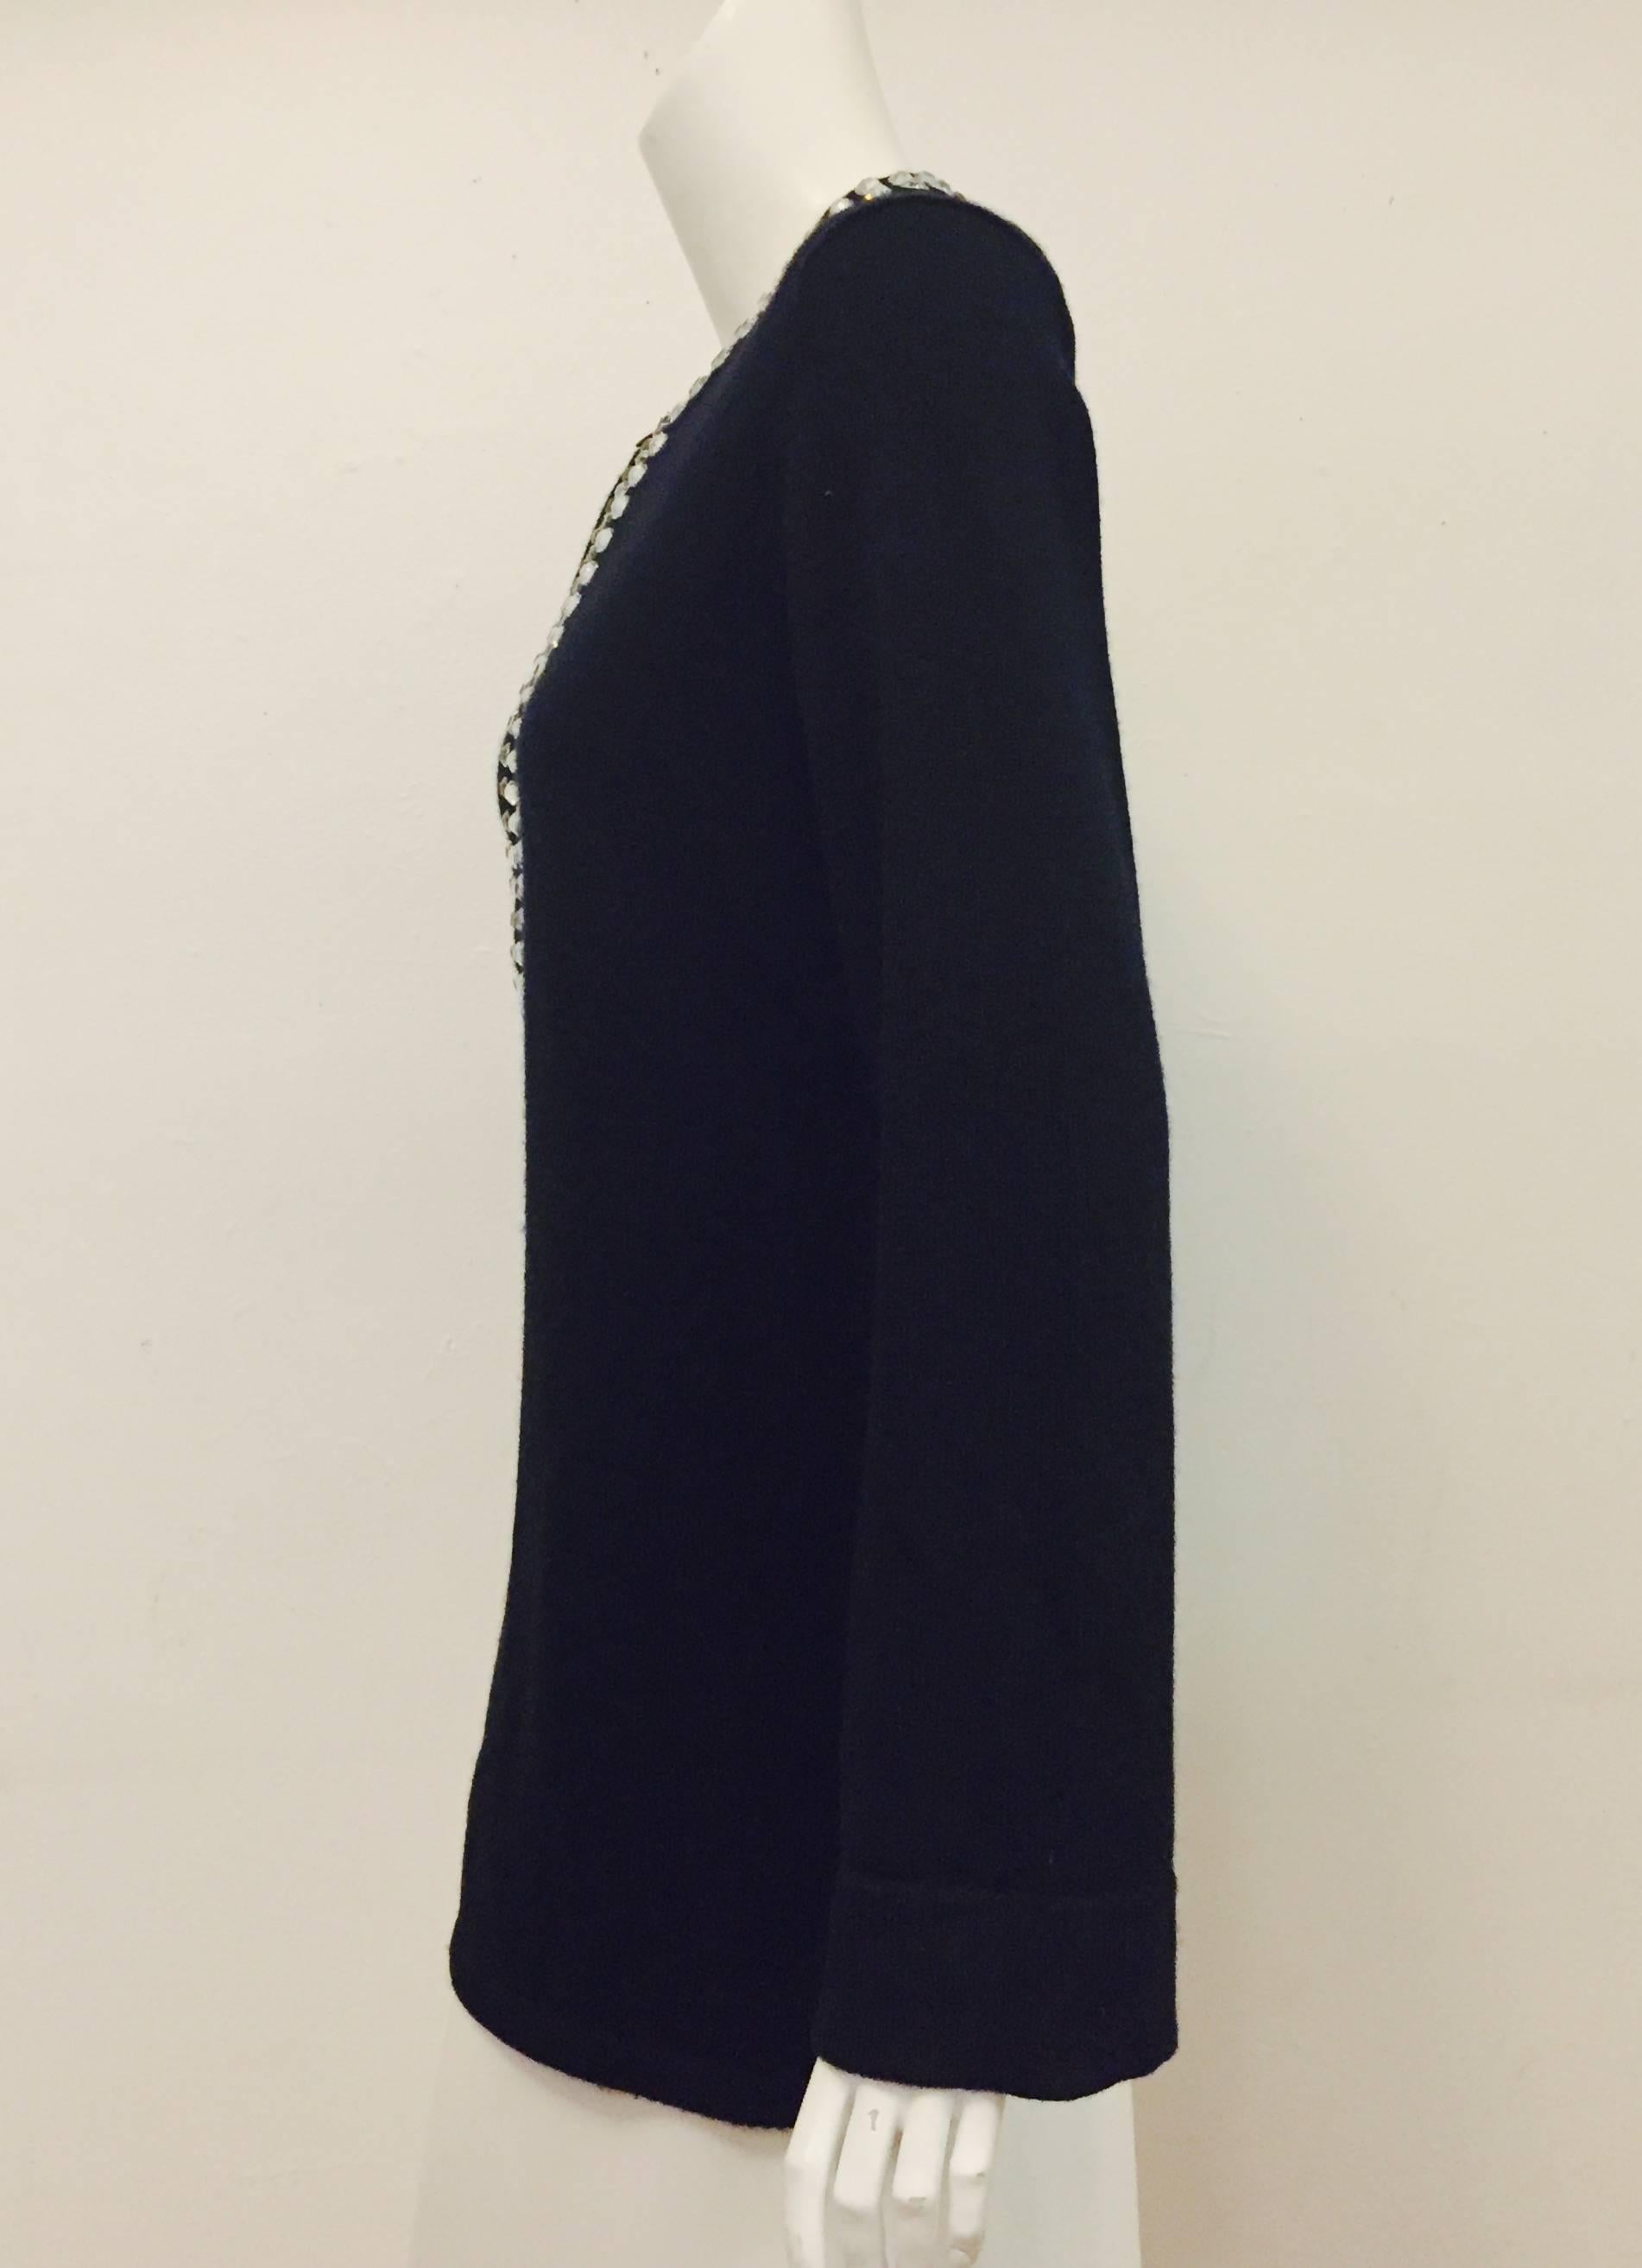 Michael Kors crystal embellished black luxe cashmere pullover sweater has front 9 1/2